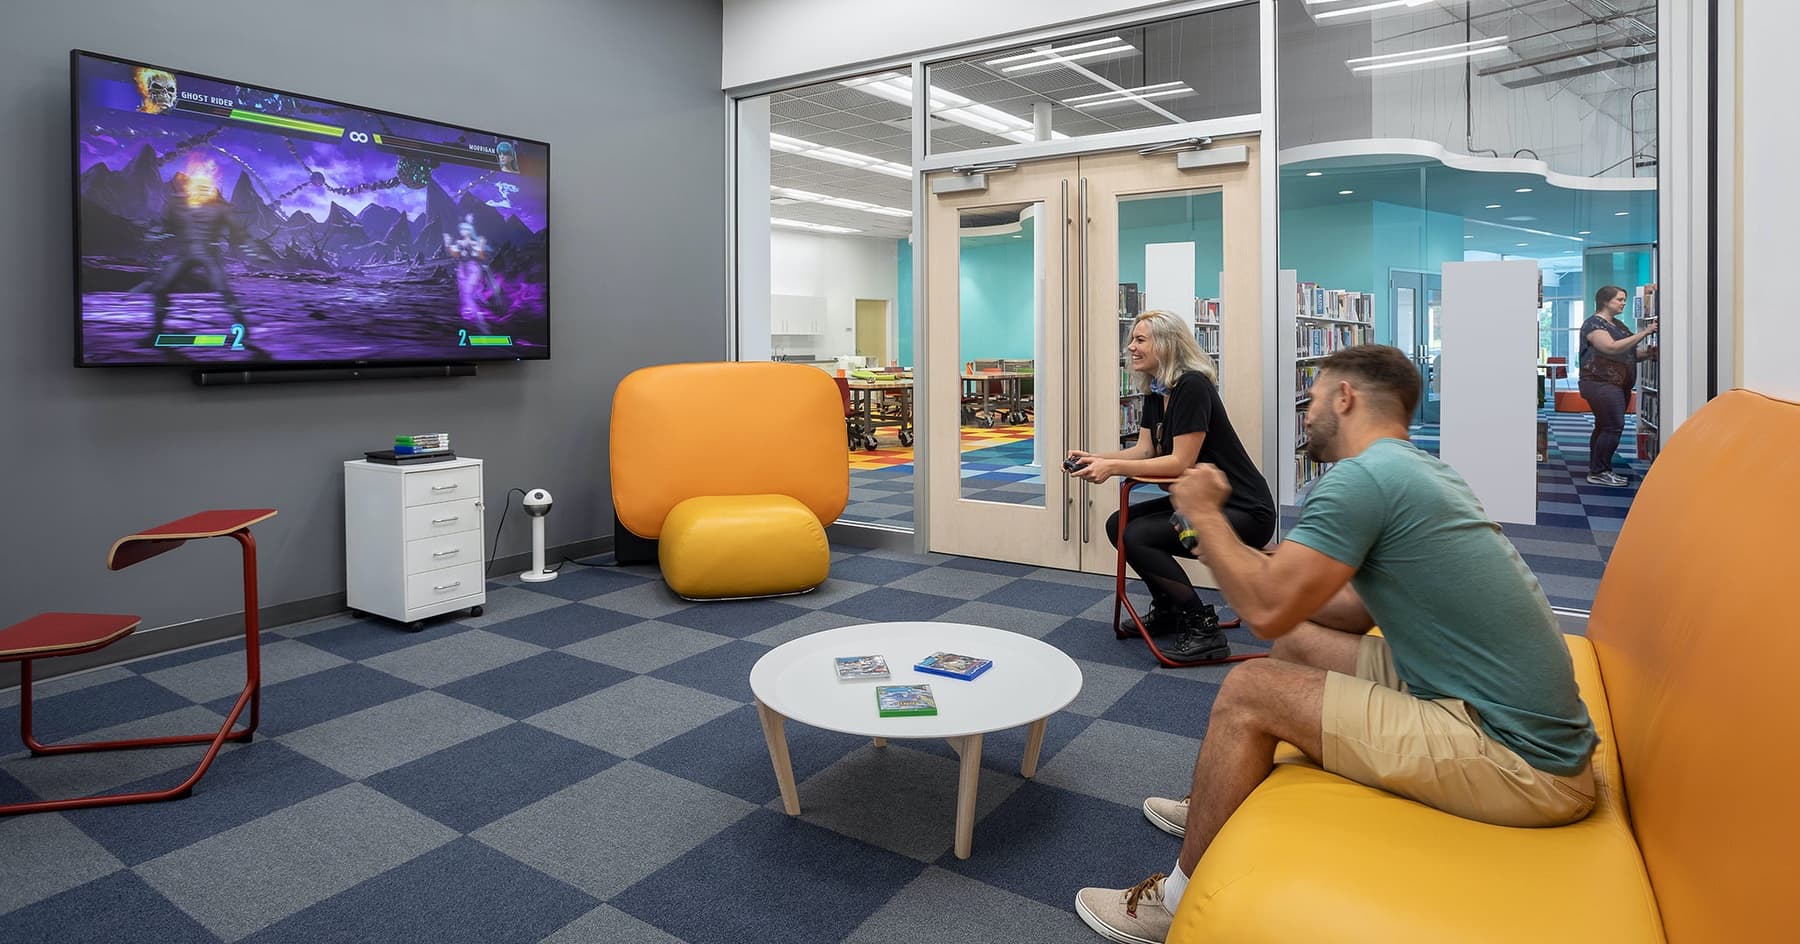 Creating a teen space was an important factor in the design for Richland Library Southeast in Columbia SC